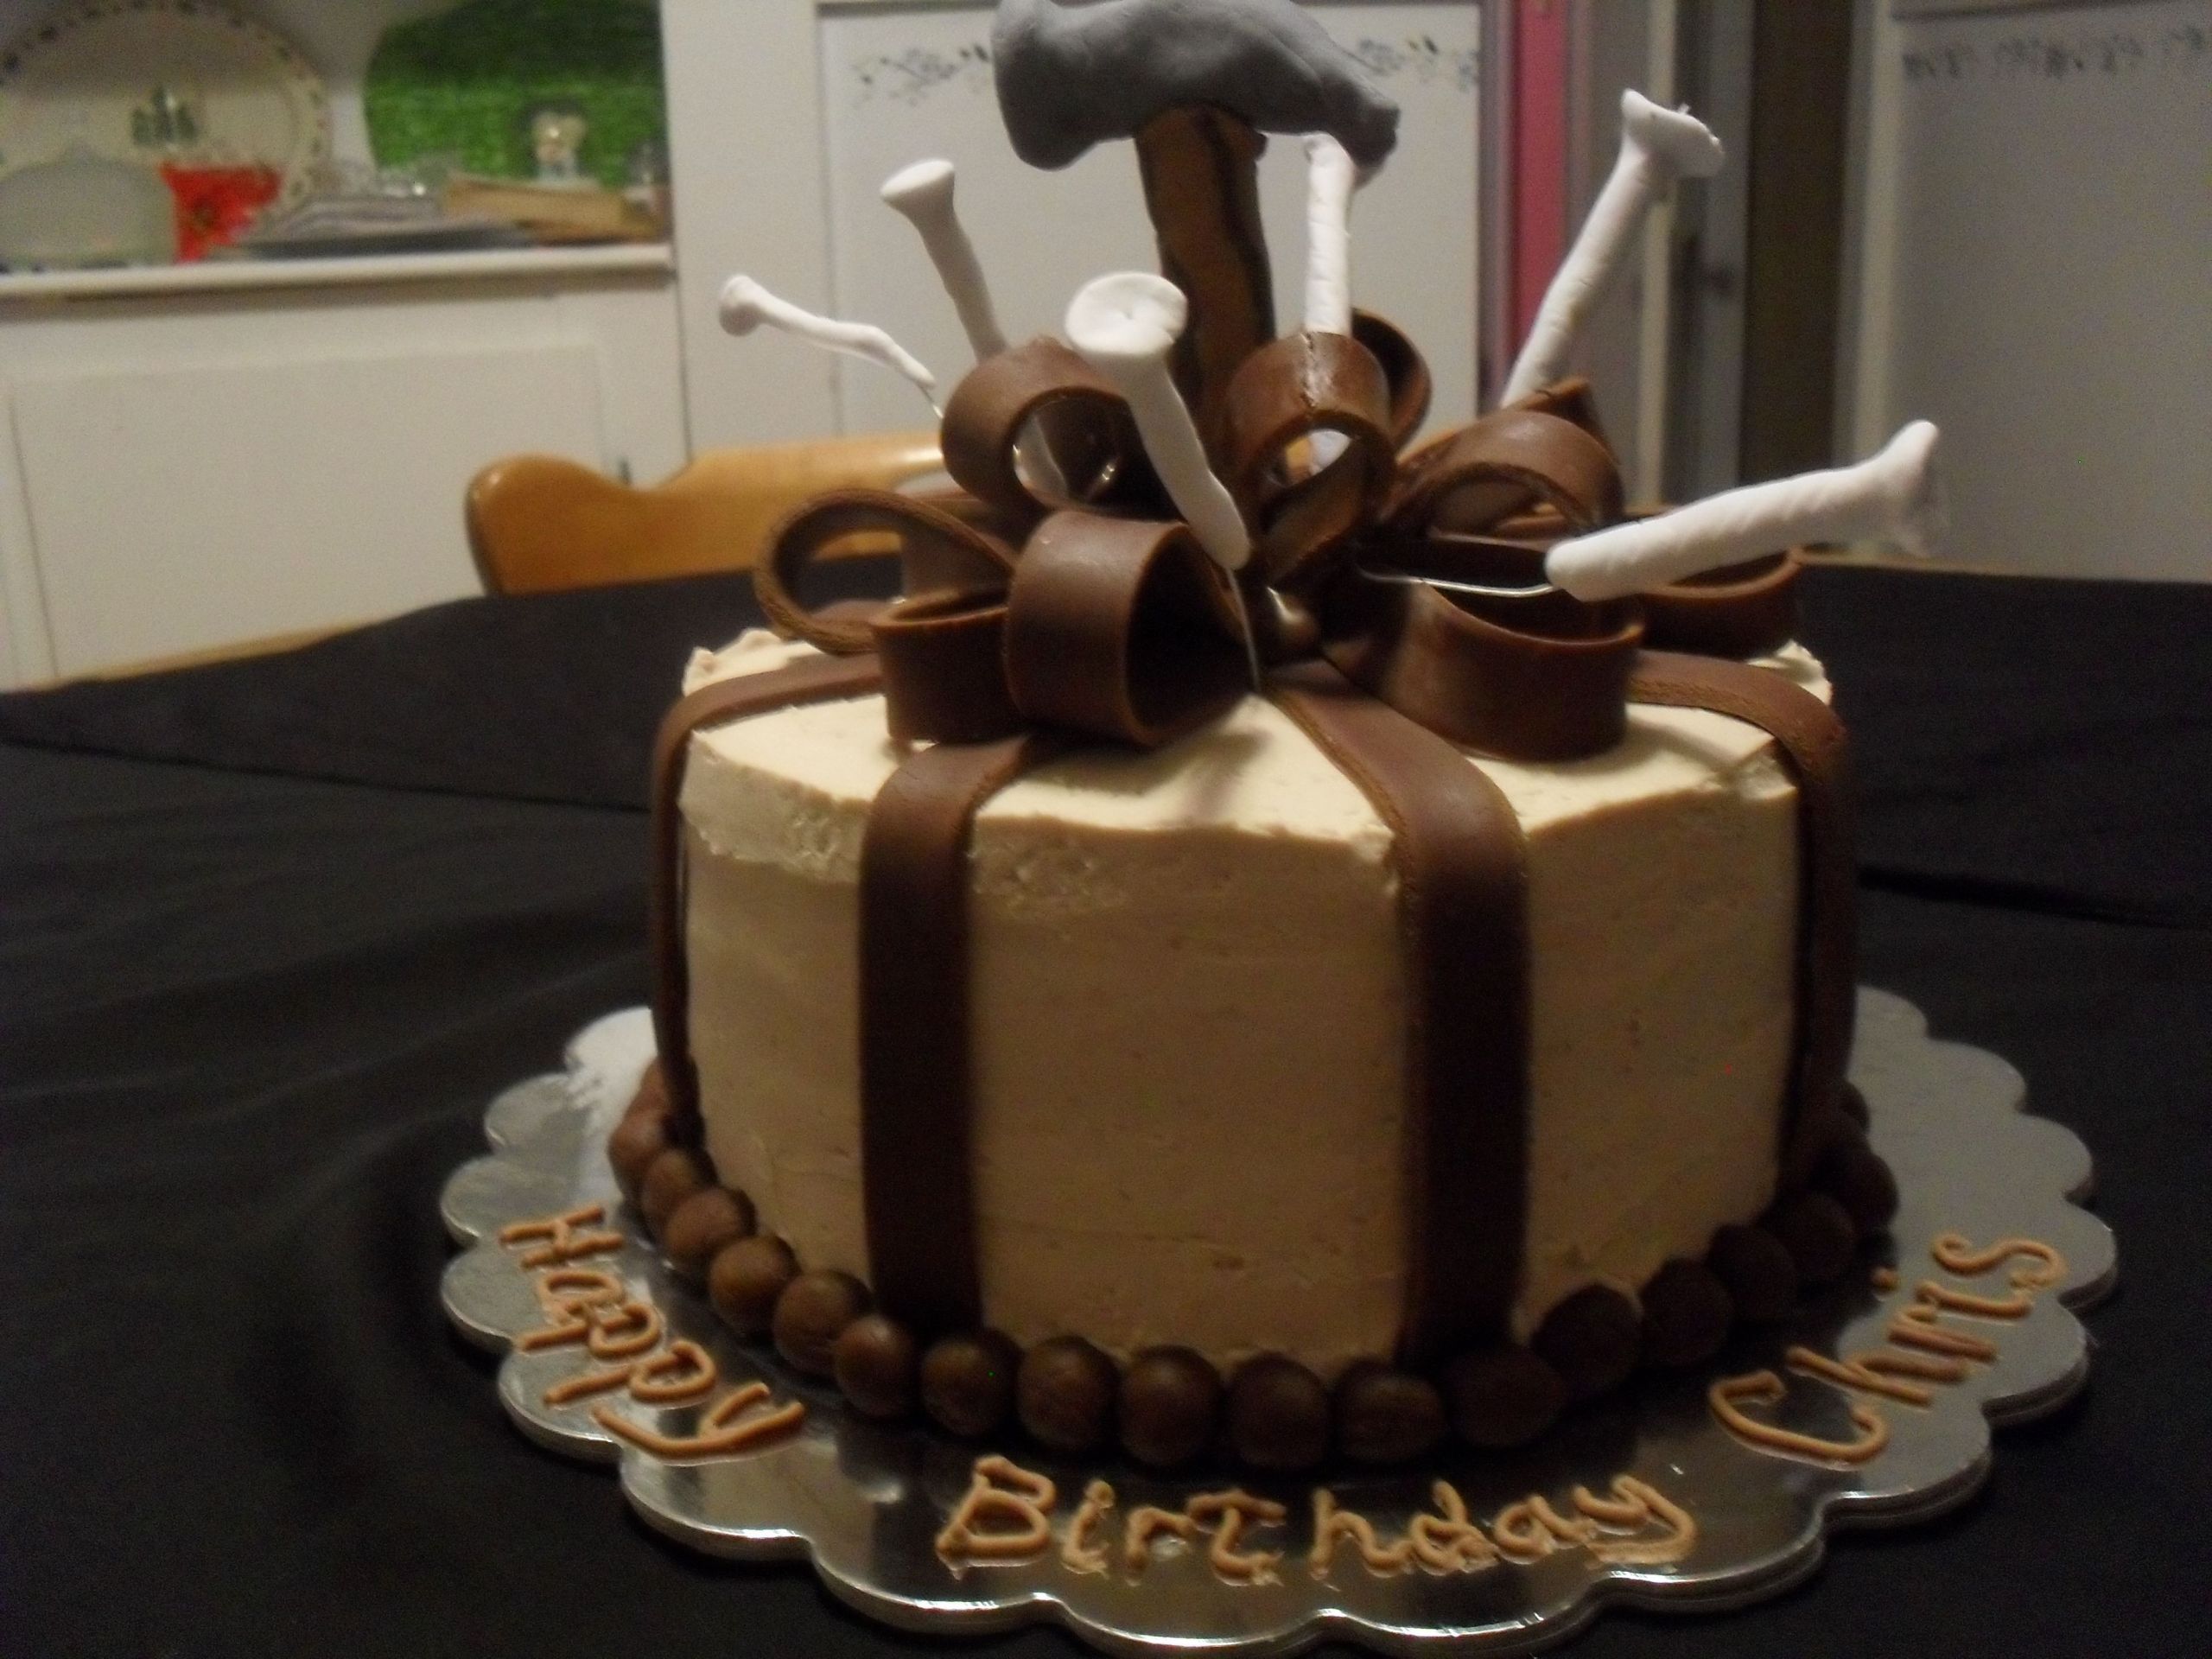 Happy Birthday Cake For A Man
 Handy man Birthday Cake in chocolate buttercream and